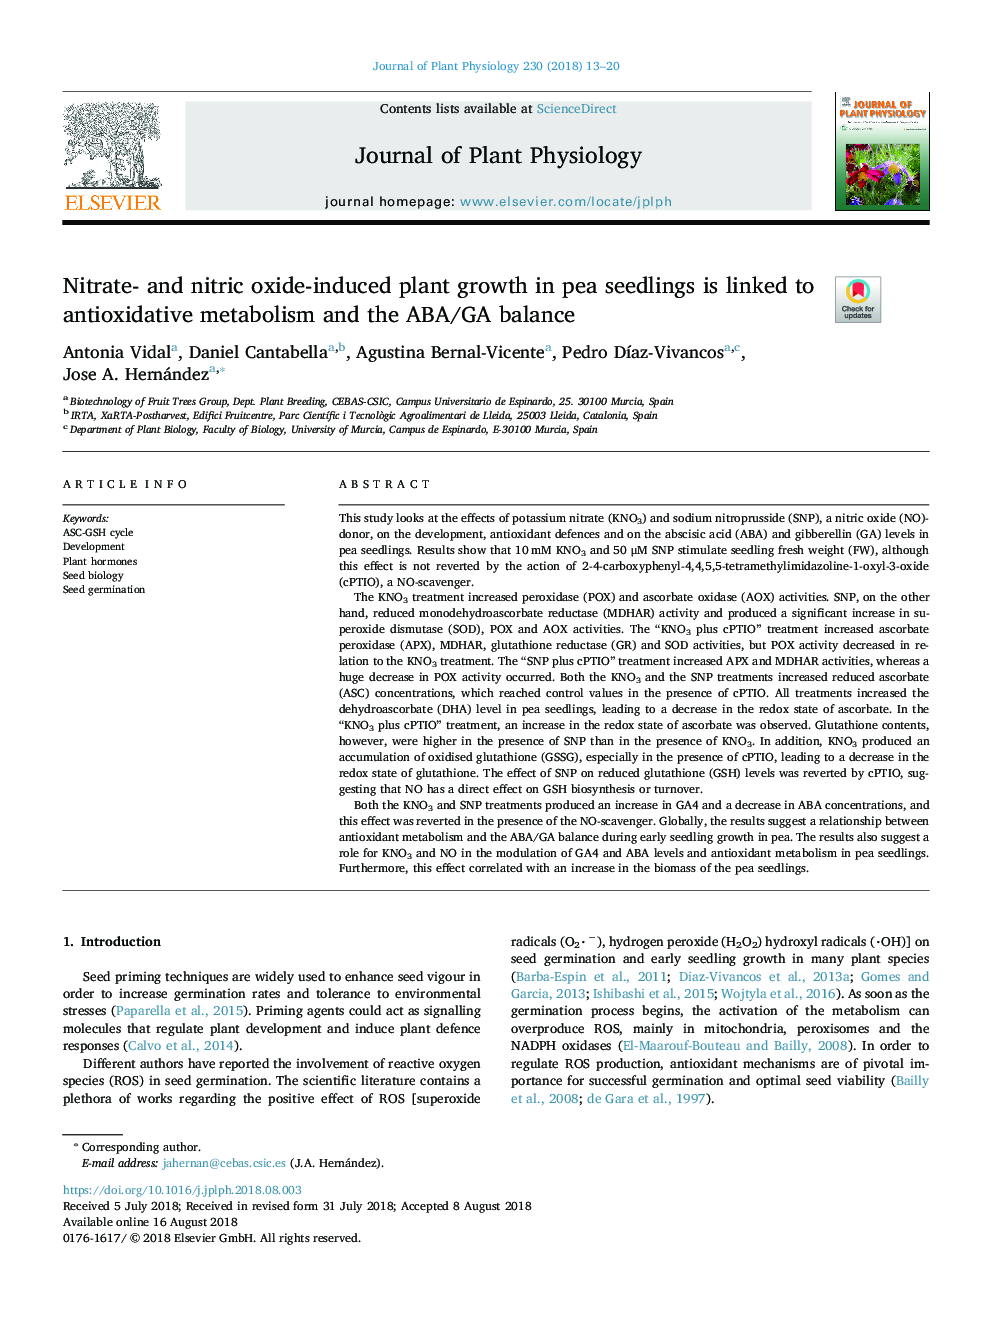 Nitrate- and nitric oxide-induced plant growth in pea seedlings is linked to antioxidative metabolism and the ABA/GA balance